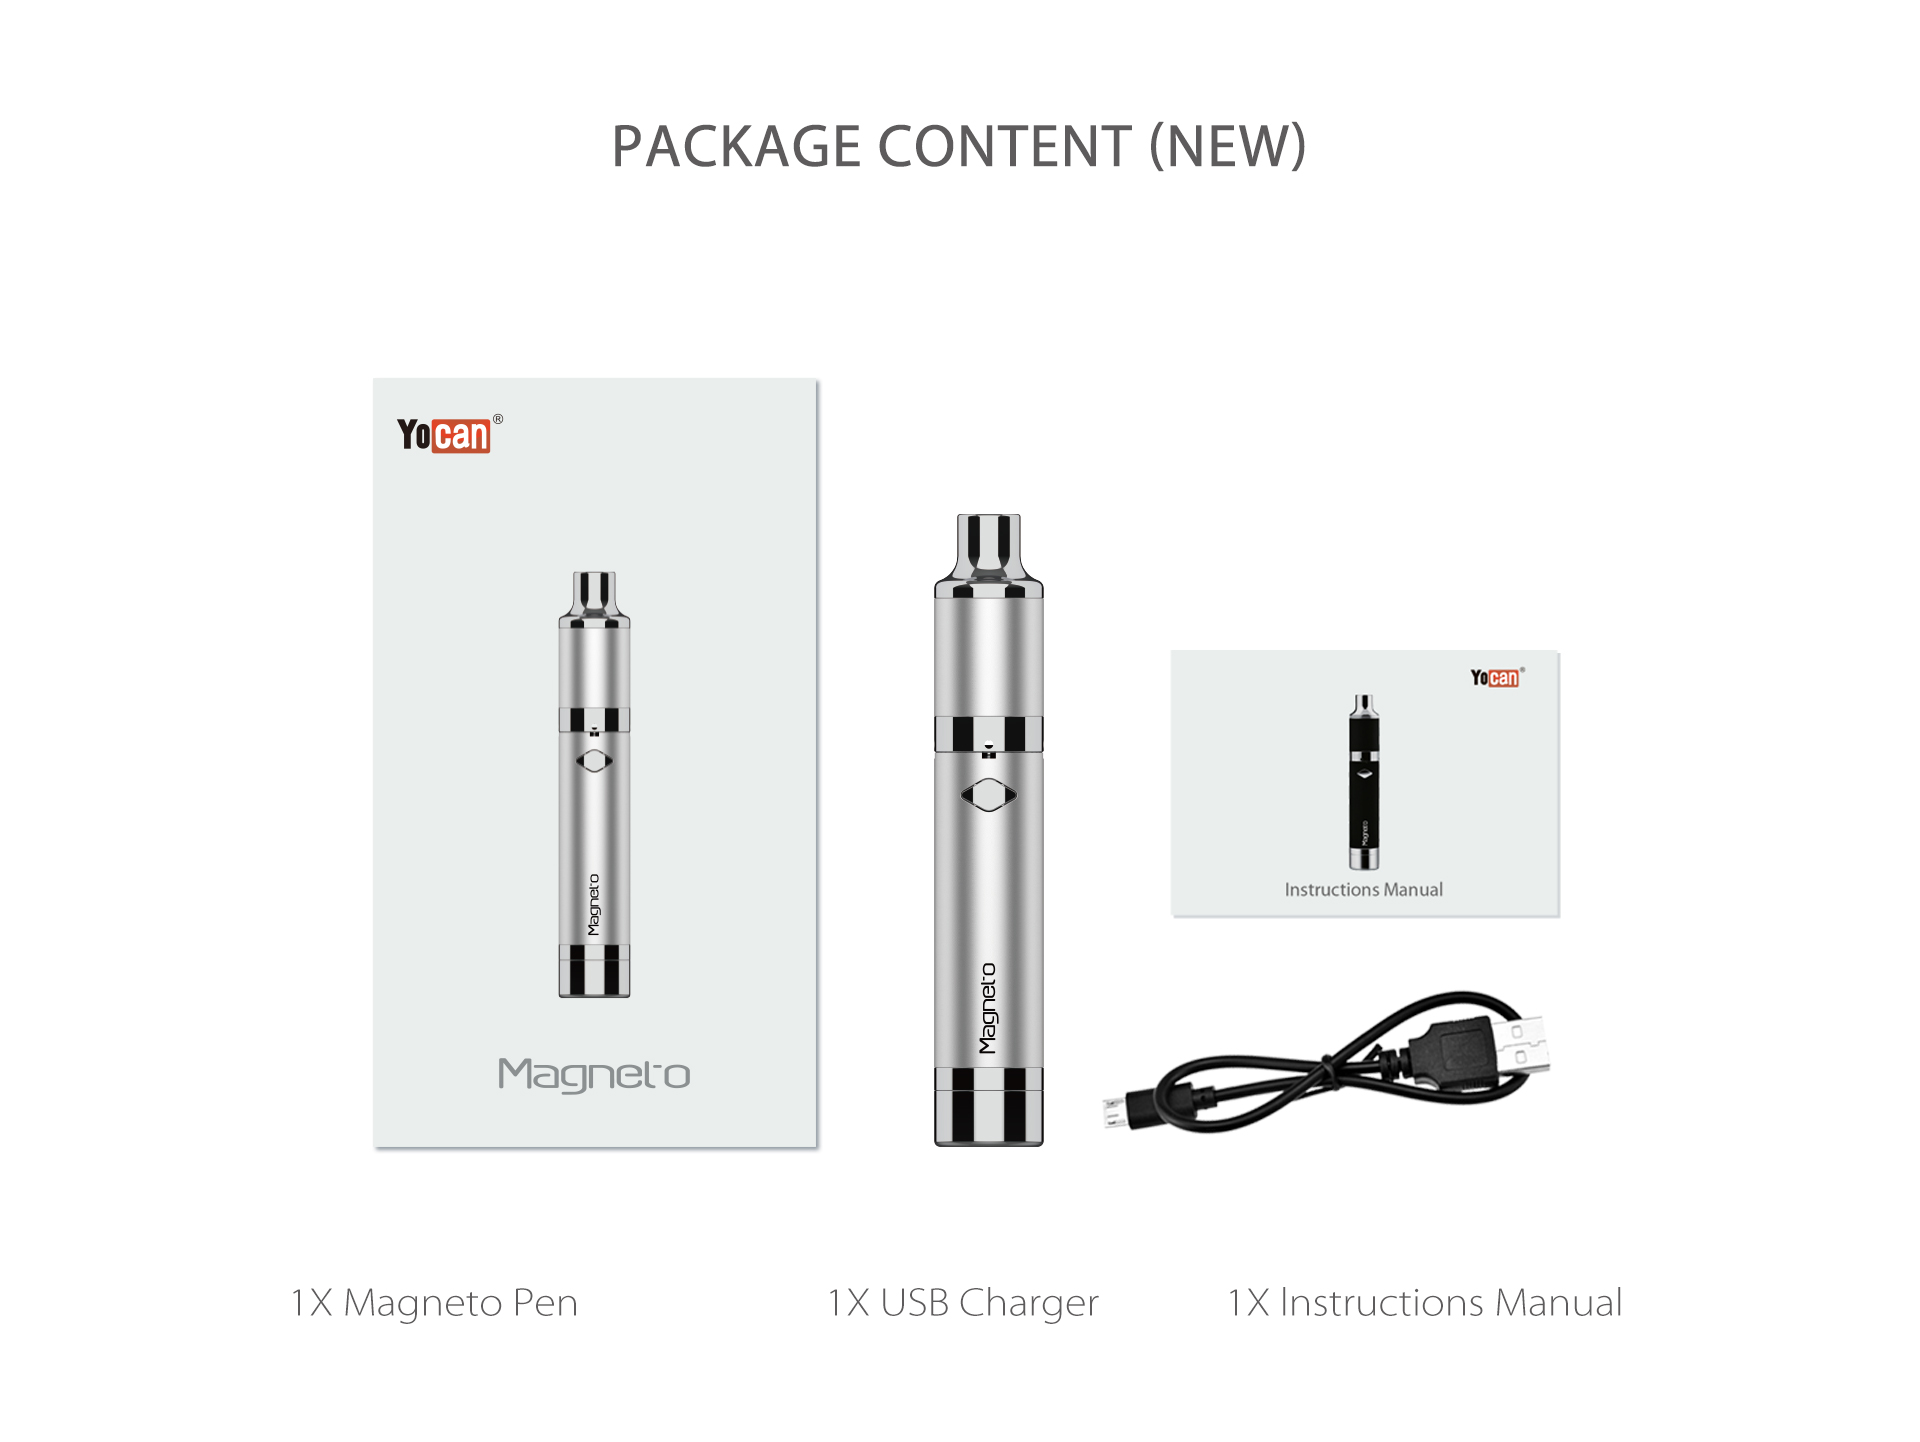 Yocan Magneto concentrate vaporizer pen package content.